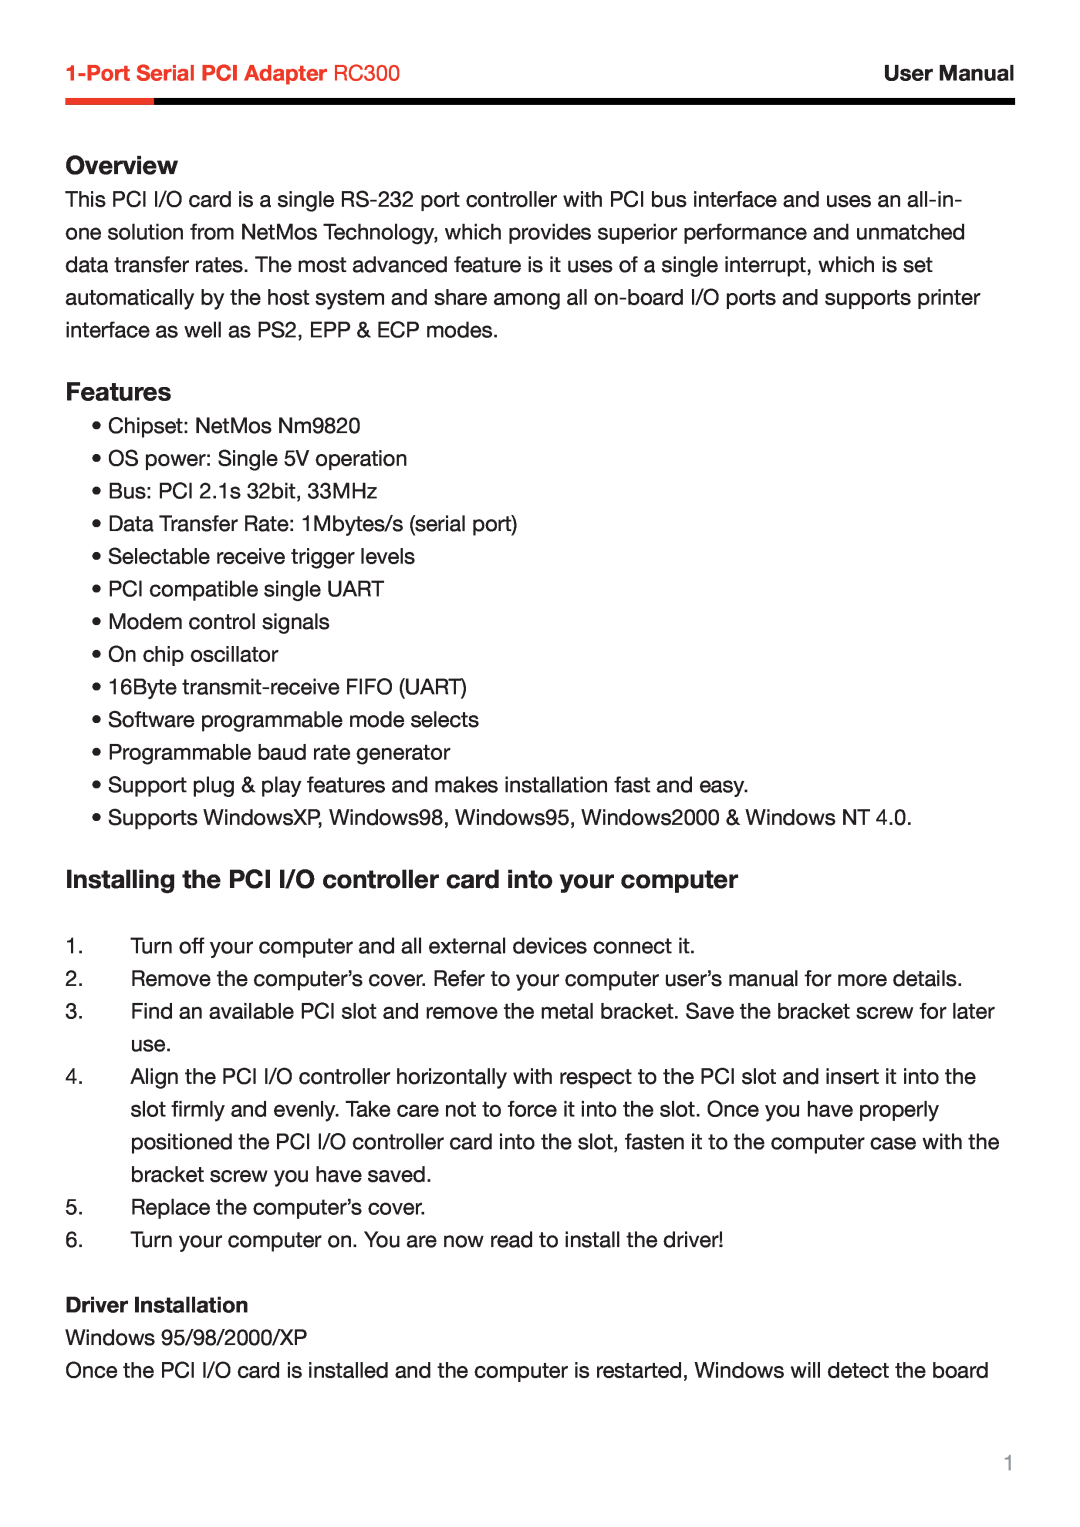 Rosewill RC-300 user manual Overview, Features, Installing the PCI I/O controller card into your computer, User Manual 